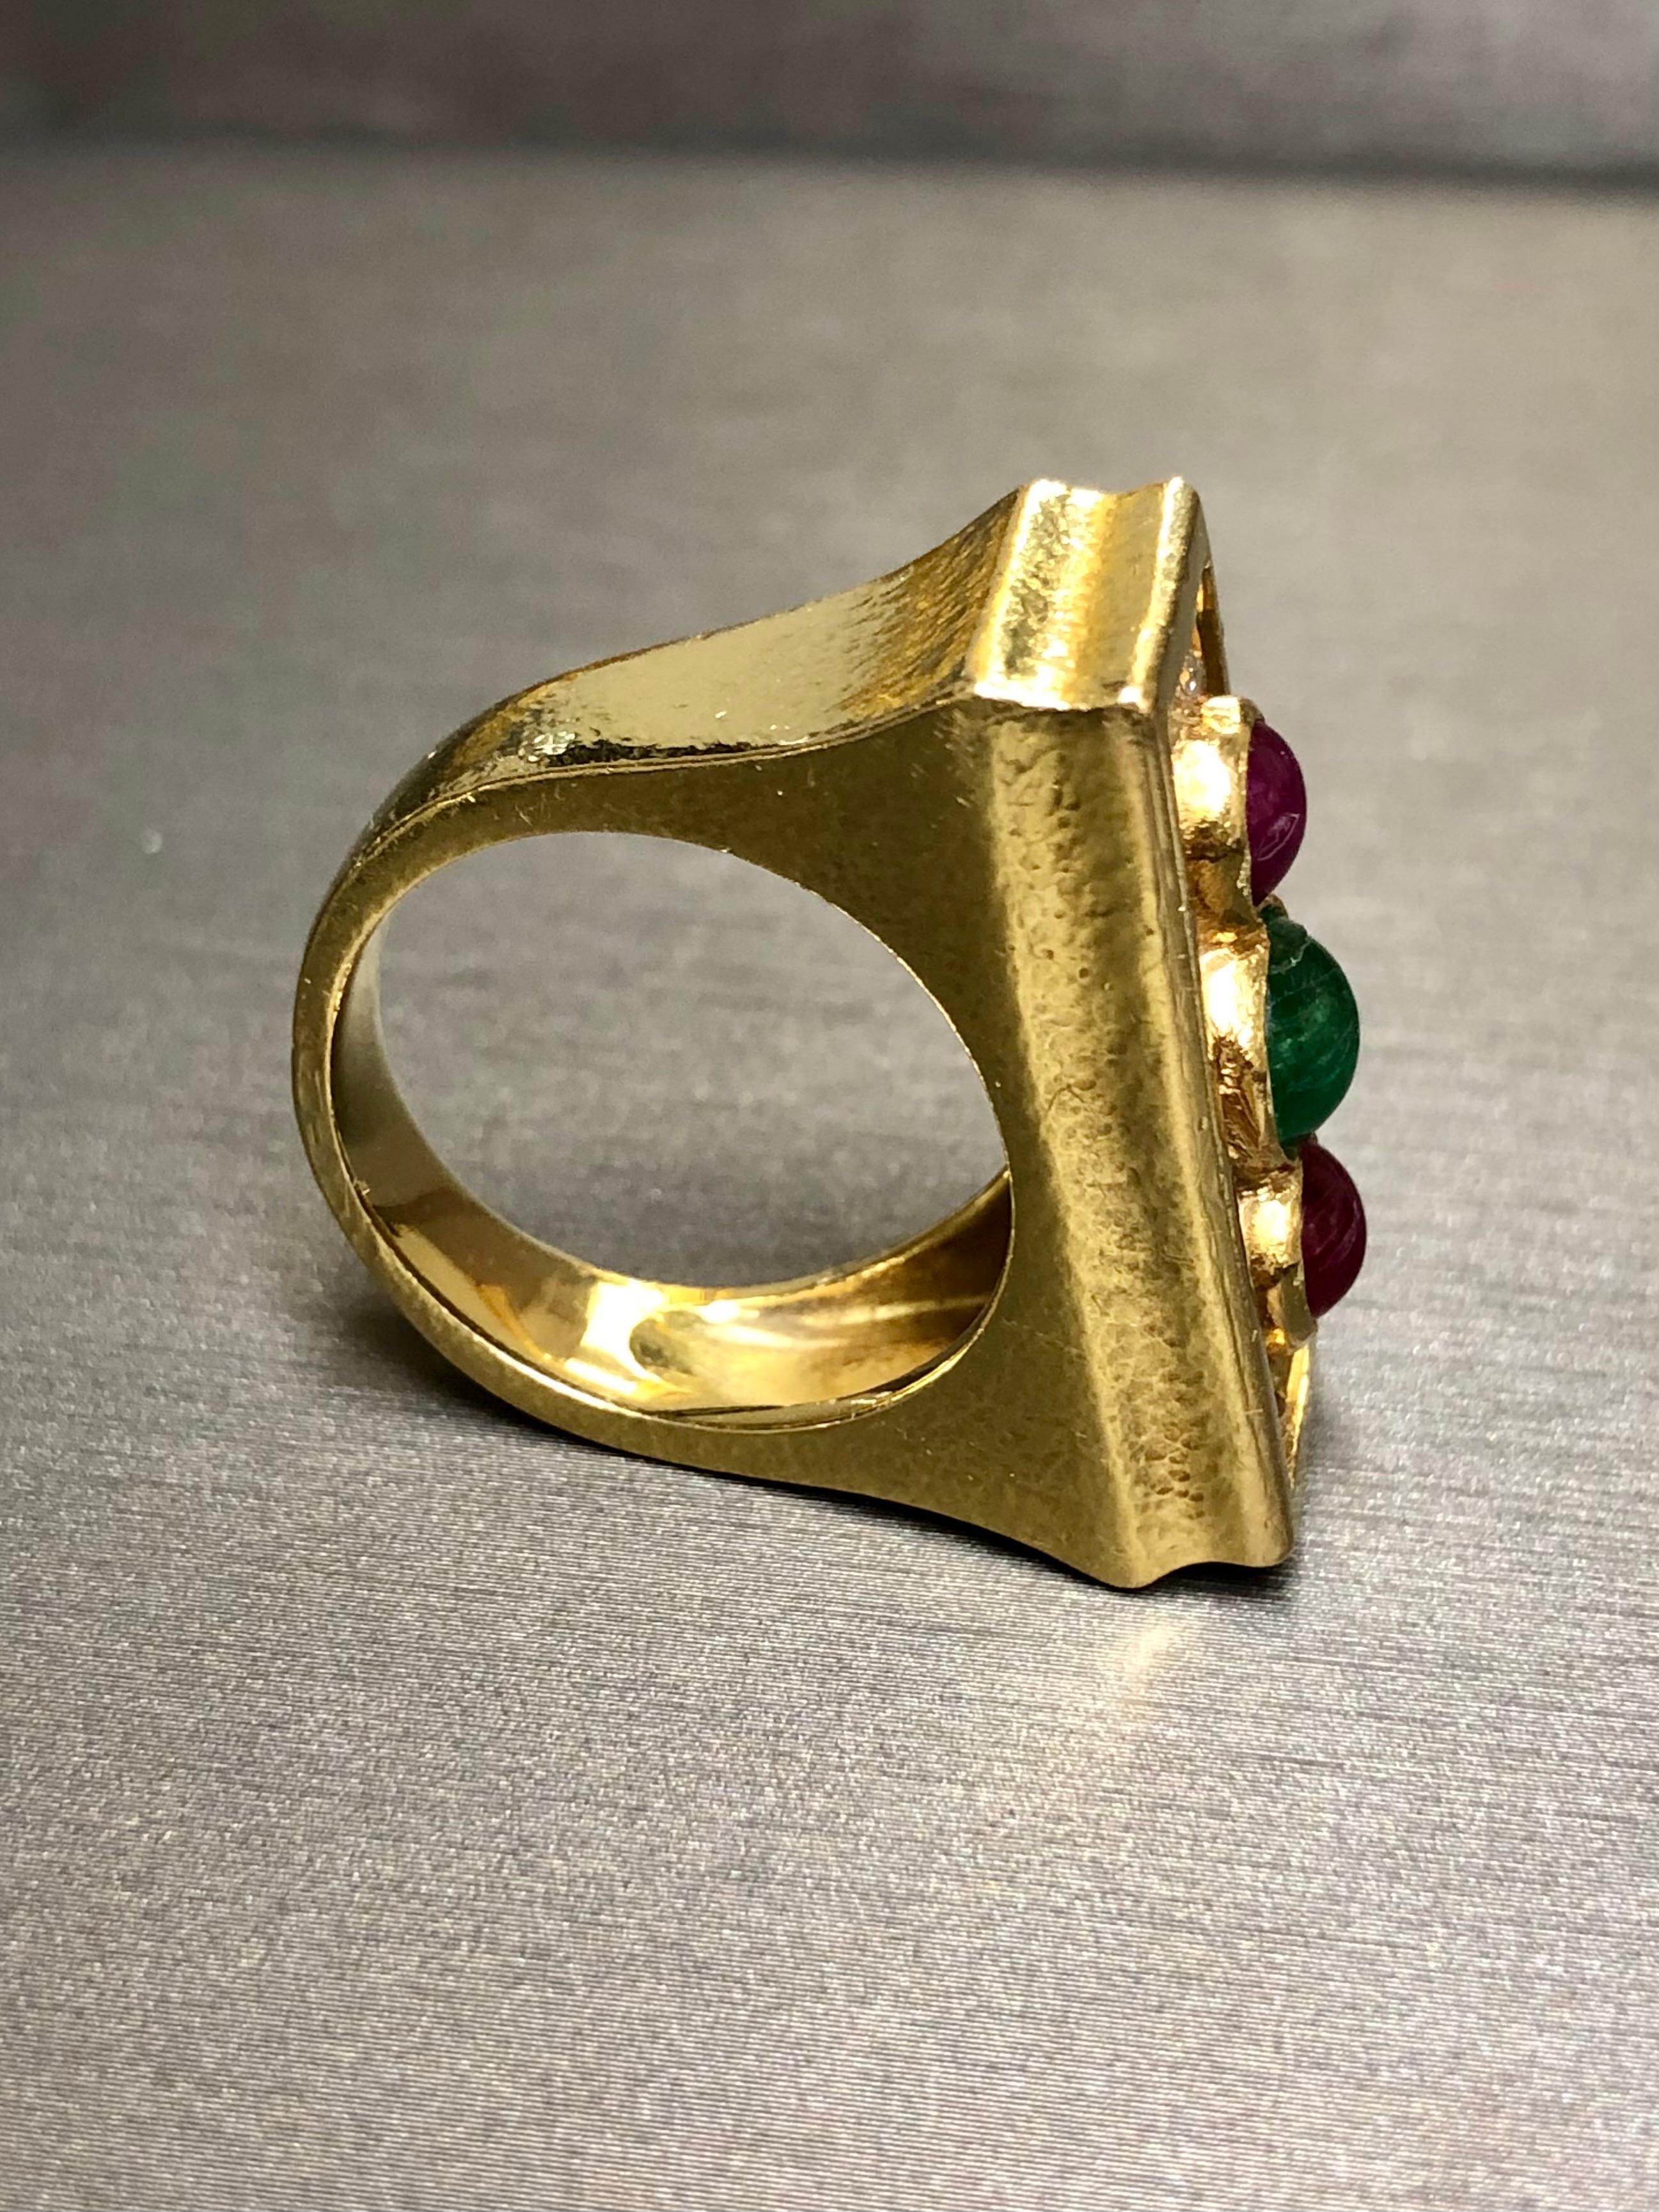 
A name that’s speaks for itself. This original David Webb ring has been done in 18K yellow gold and finished with a hammered texture. The center portion has been set with round and baguette diamonds as well as cabochon rubies and emeralds. A